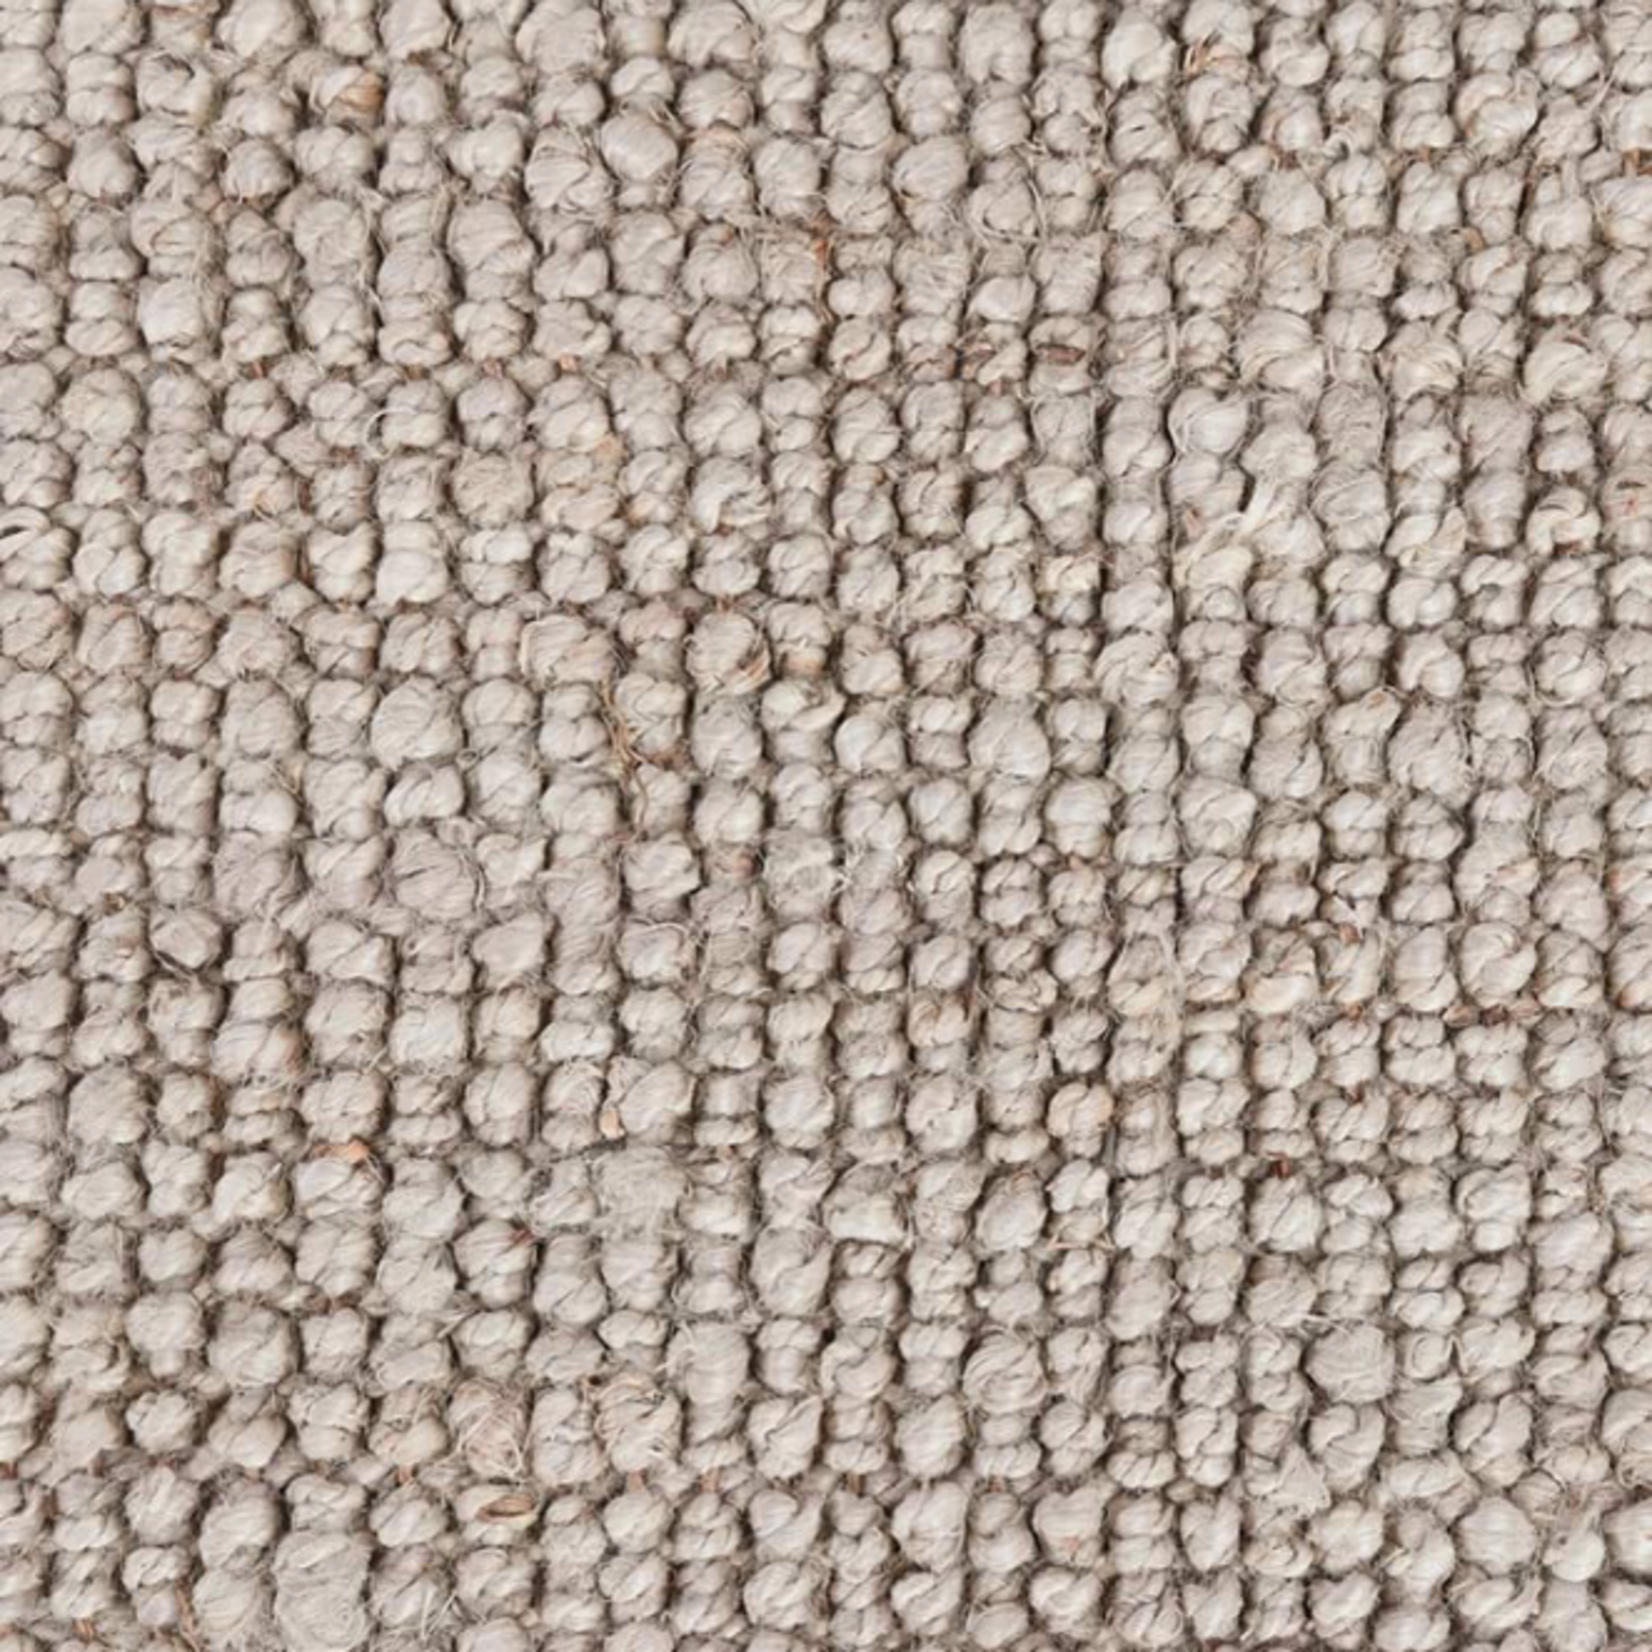 Outside The Box 2x3 Oatmeal Chunky Loop Handwoven Jute Seagrass Blend Rug